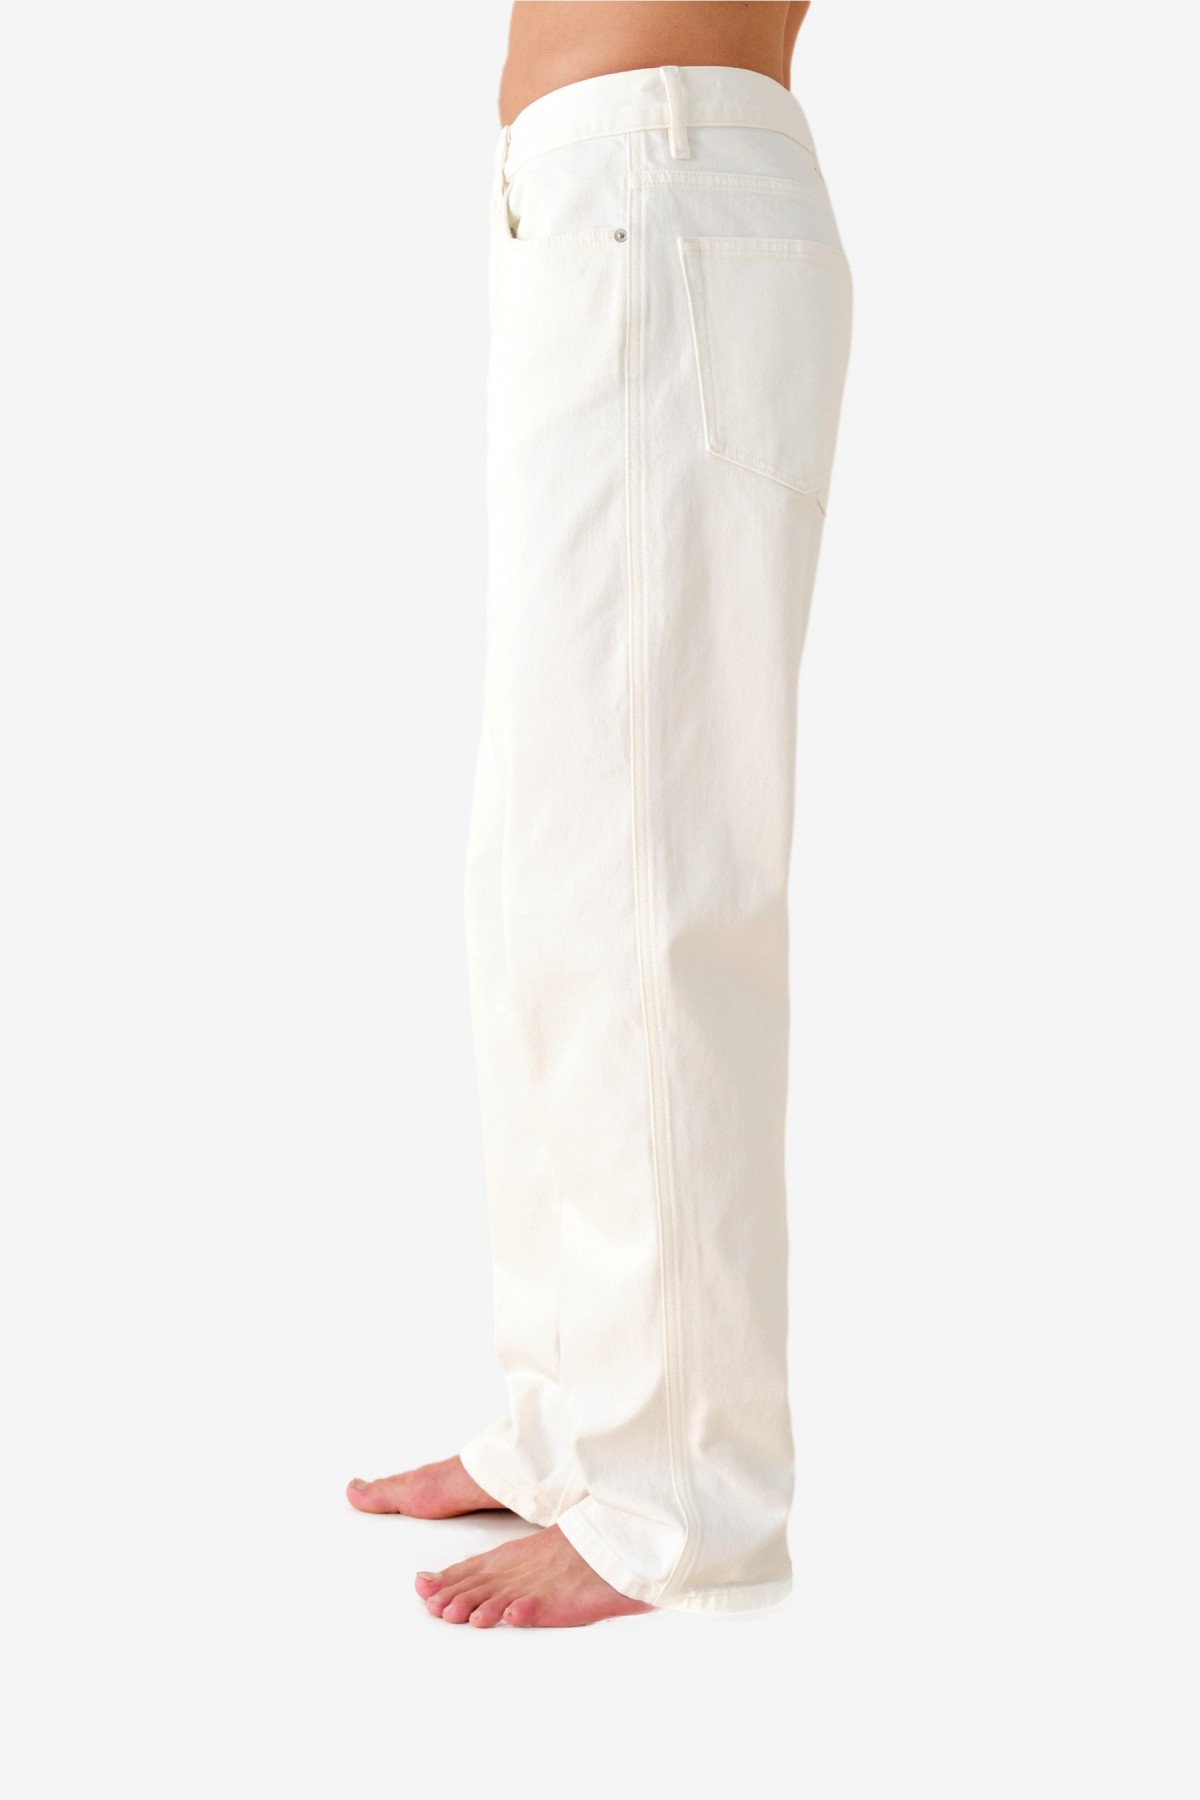 Jeanerica RM006 Reconstructed Jeans in Natural White